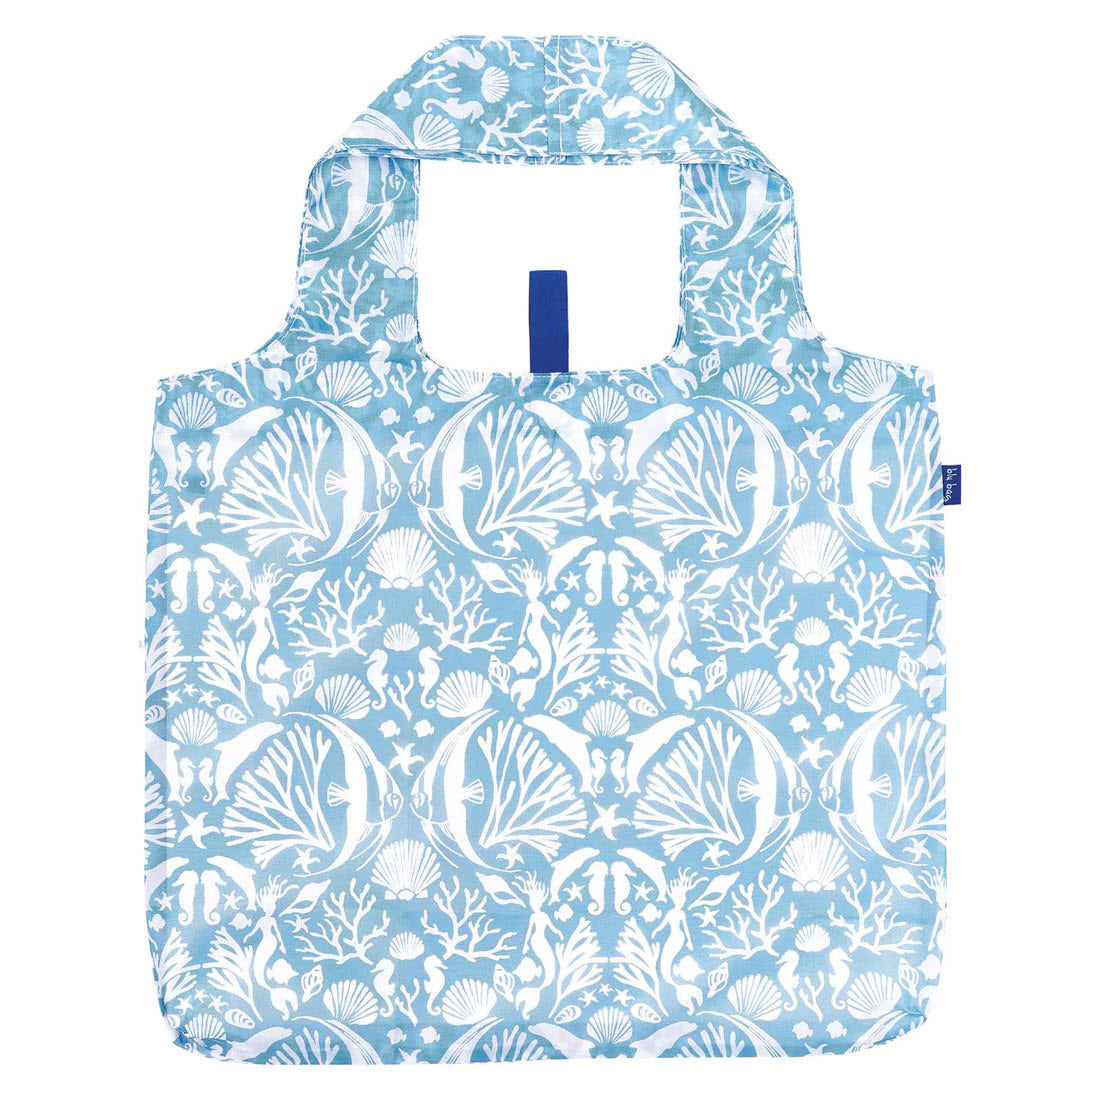 Reusable market tote with a BLU BAG UNDERWATER SEA BLUE design, featuring built-in handles and a compact, foldable structure by Rockflowerpaper.